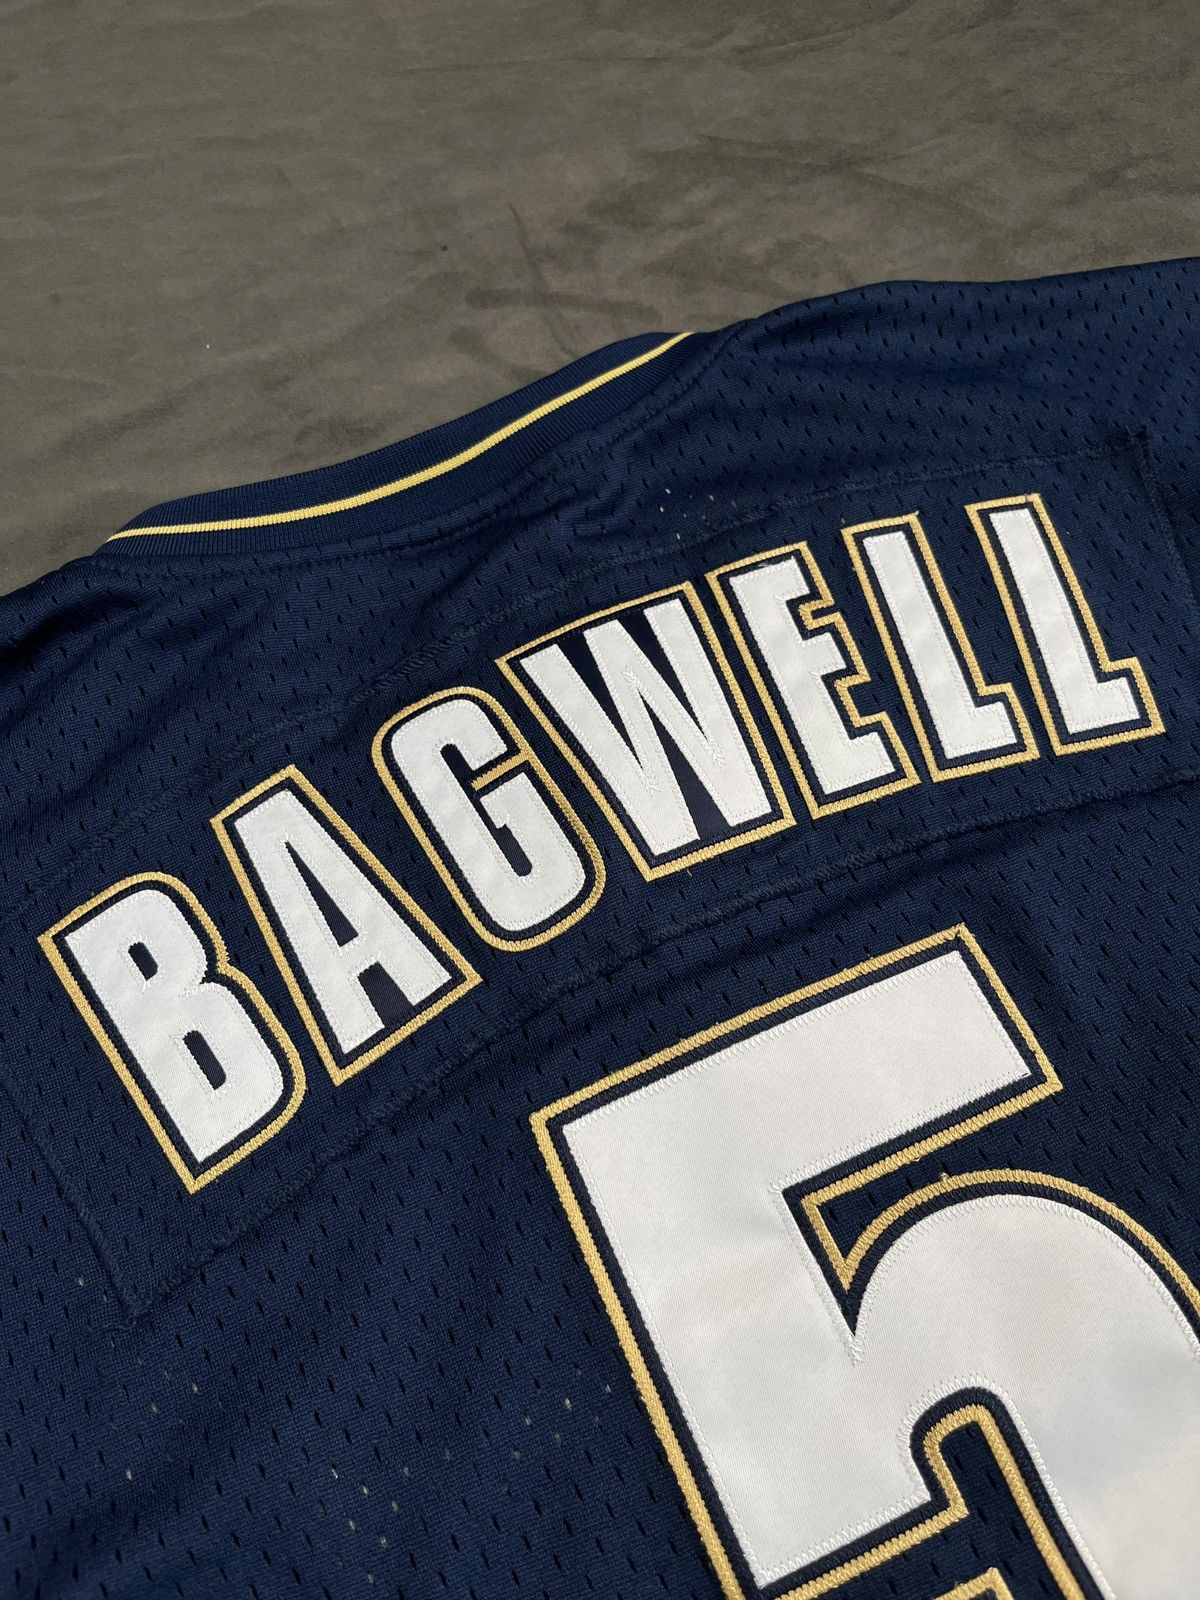 Mitchell & Ness Jeff Bagwell Houston Astros 1997 Jersey XL - 10